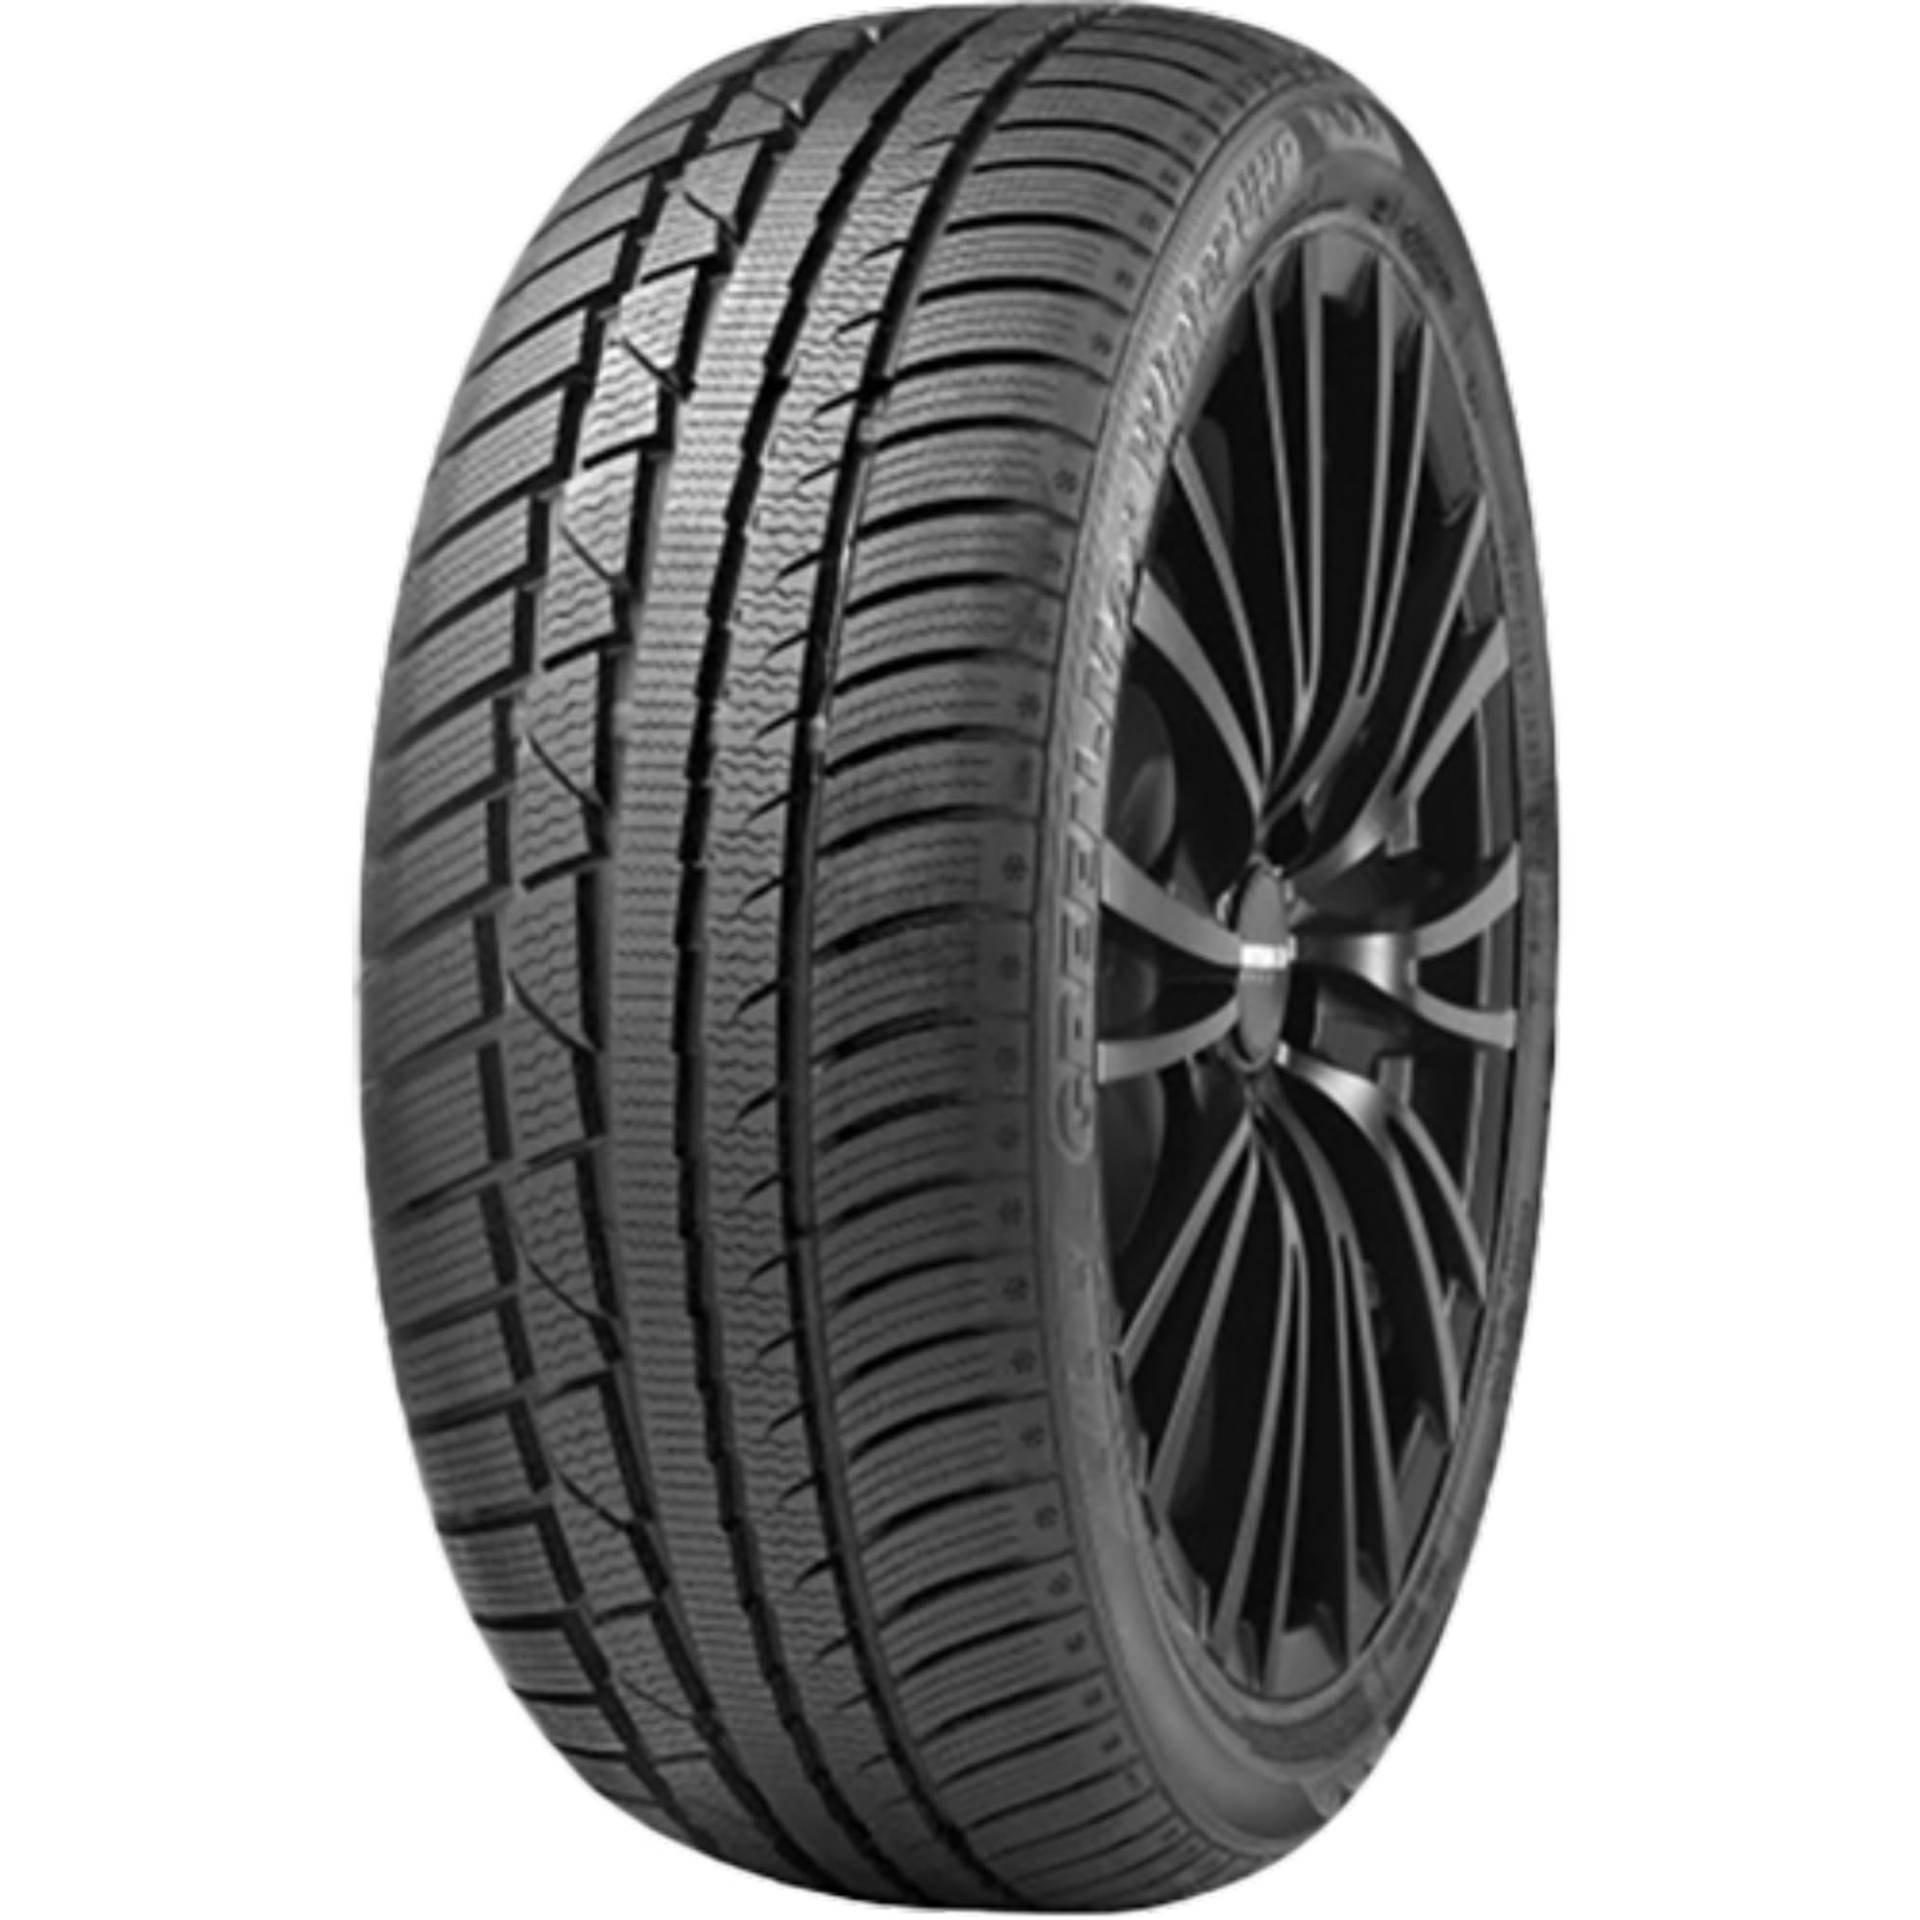 LINGLONG Winterreifen 255/55 R 19 XL TL 111H GREEN-MAX WINTER UHP BSW M+S 3PMSF (CHN) von Linglong